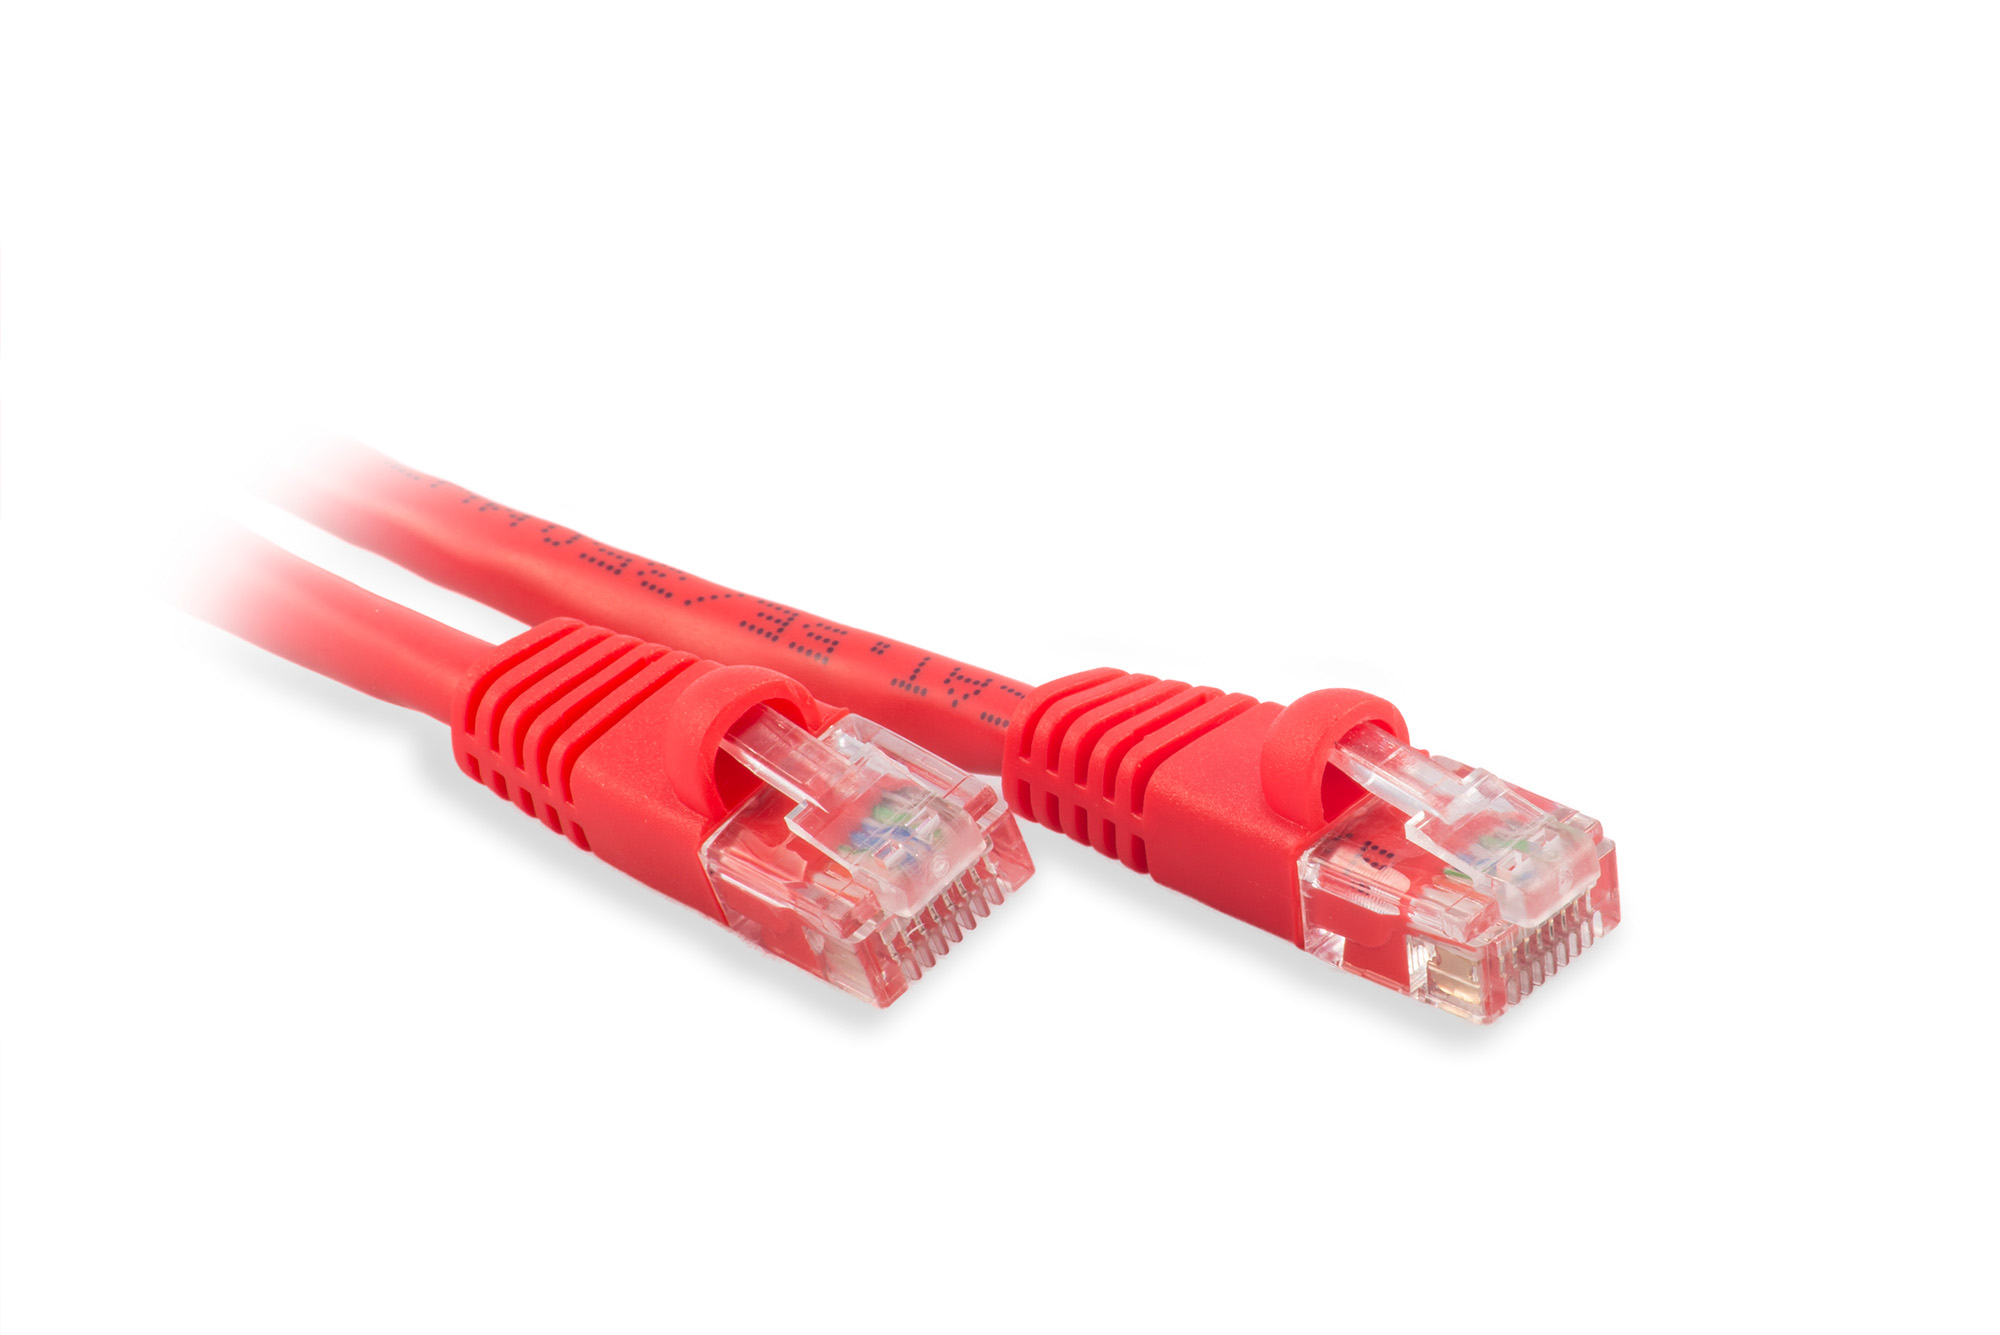 7ft Cat6 Ethernet Patch Cable - Red Color - Snagless Boot, Stranded, RJ45, 550Mhz, 24AWG